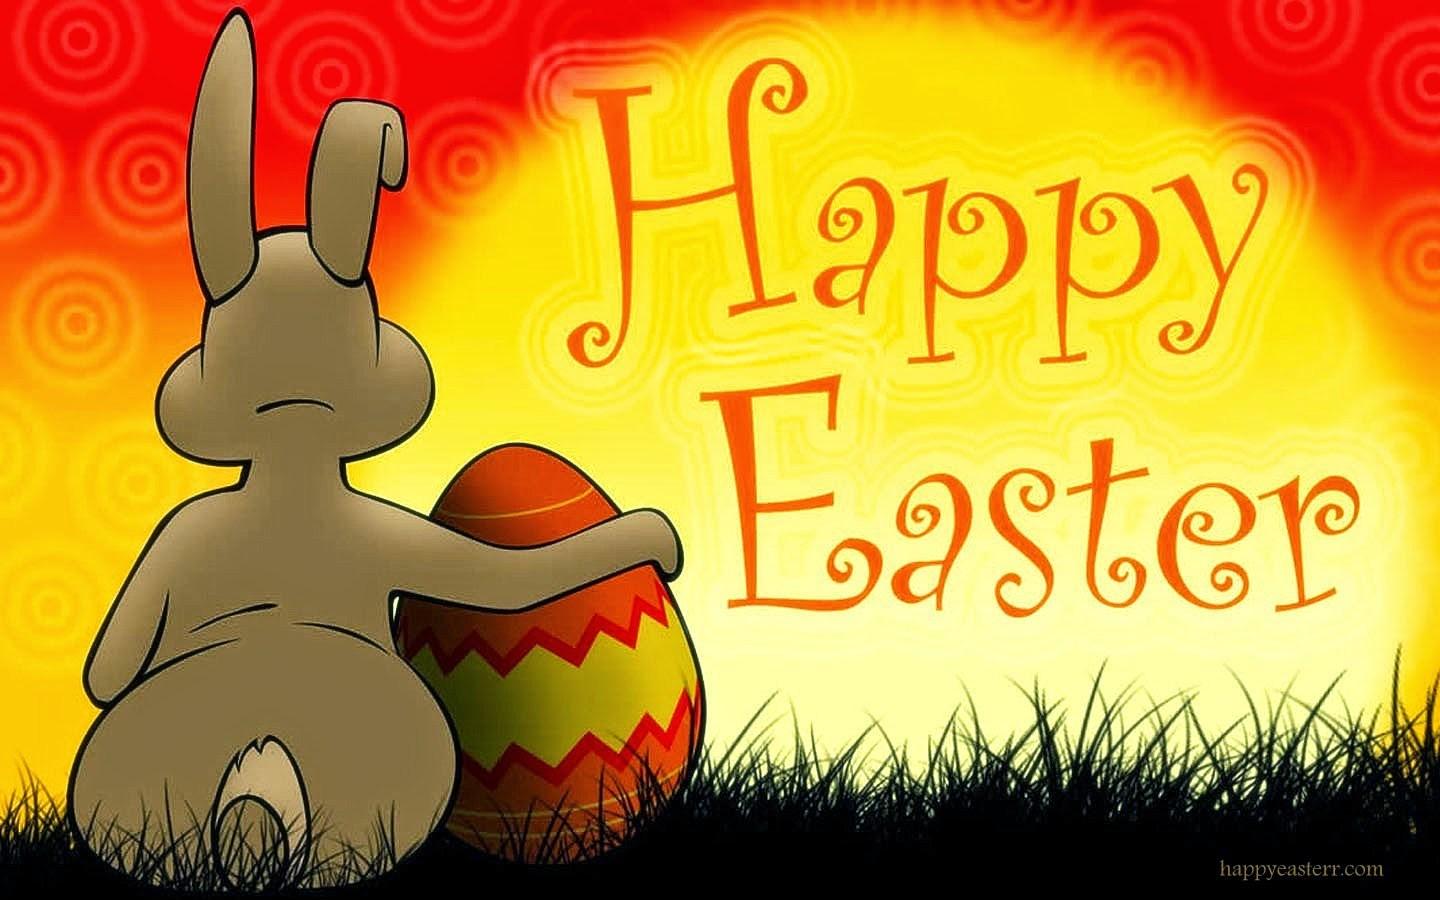 Happy Easter 2019 Image Picture HD Wallpaper And Photo Download